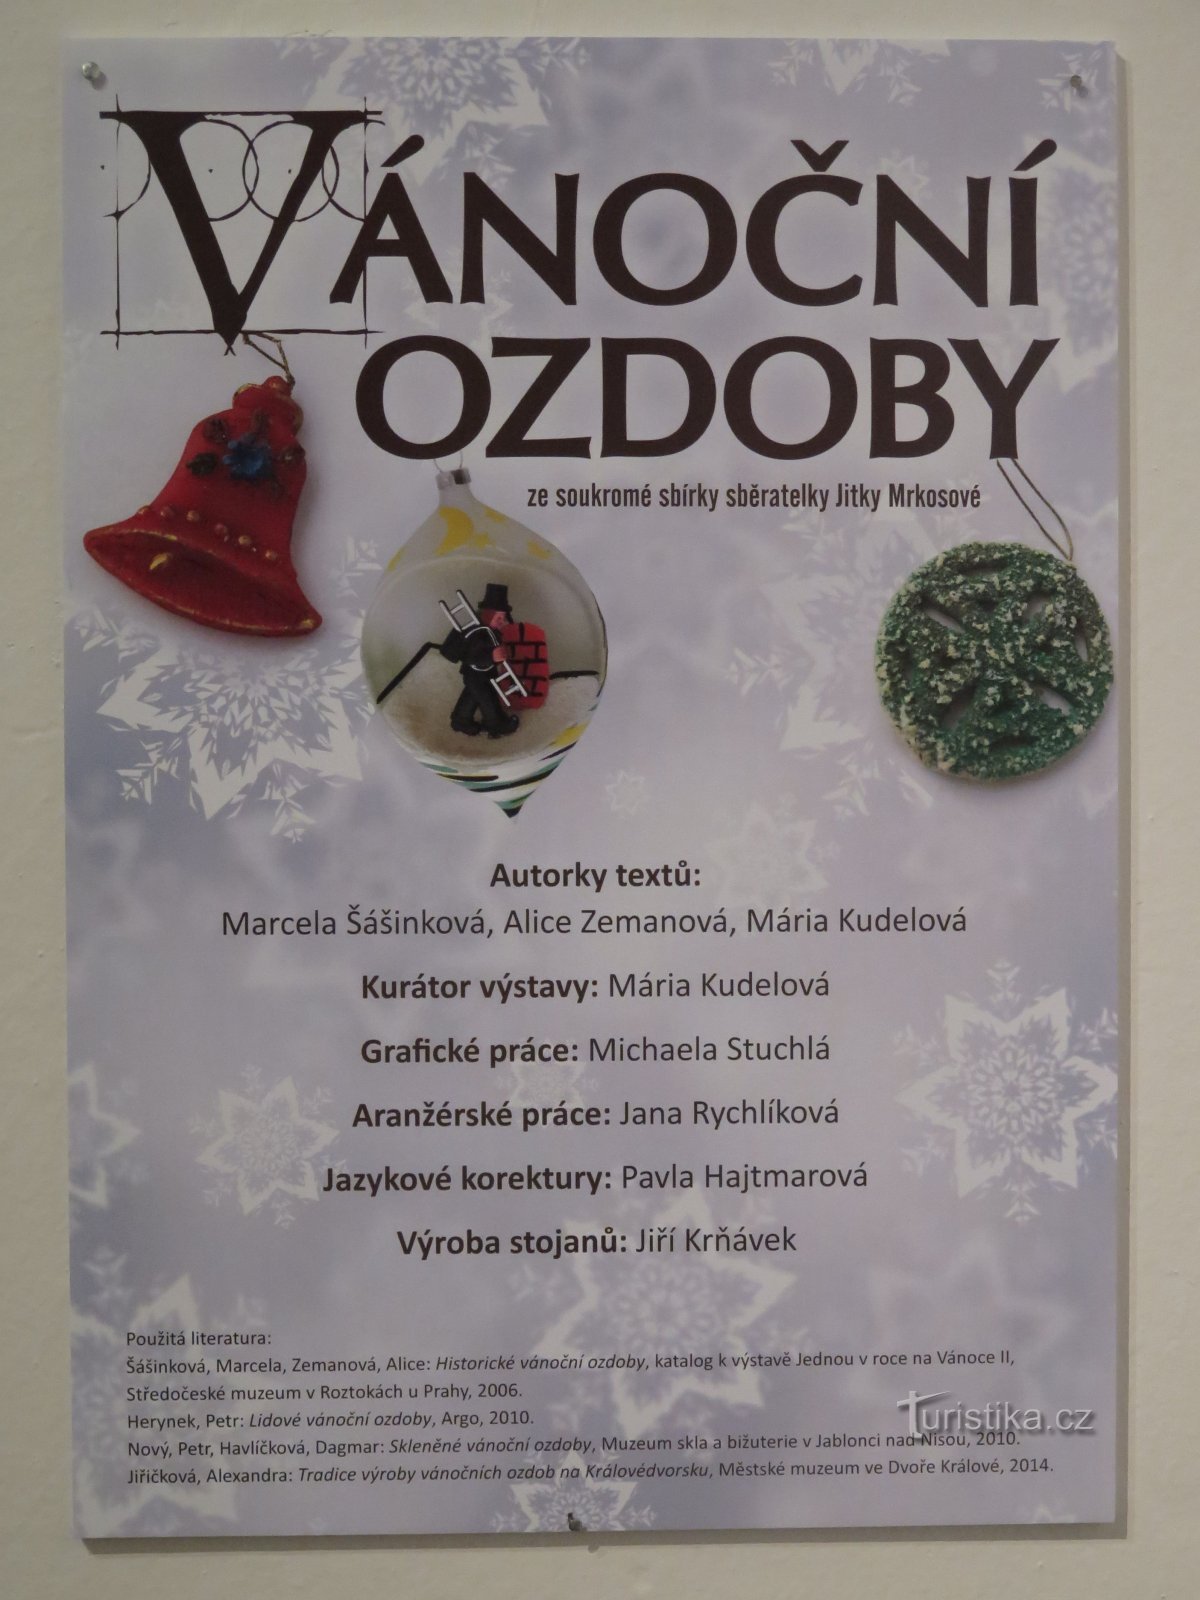 poster for the exhibition